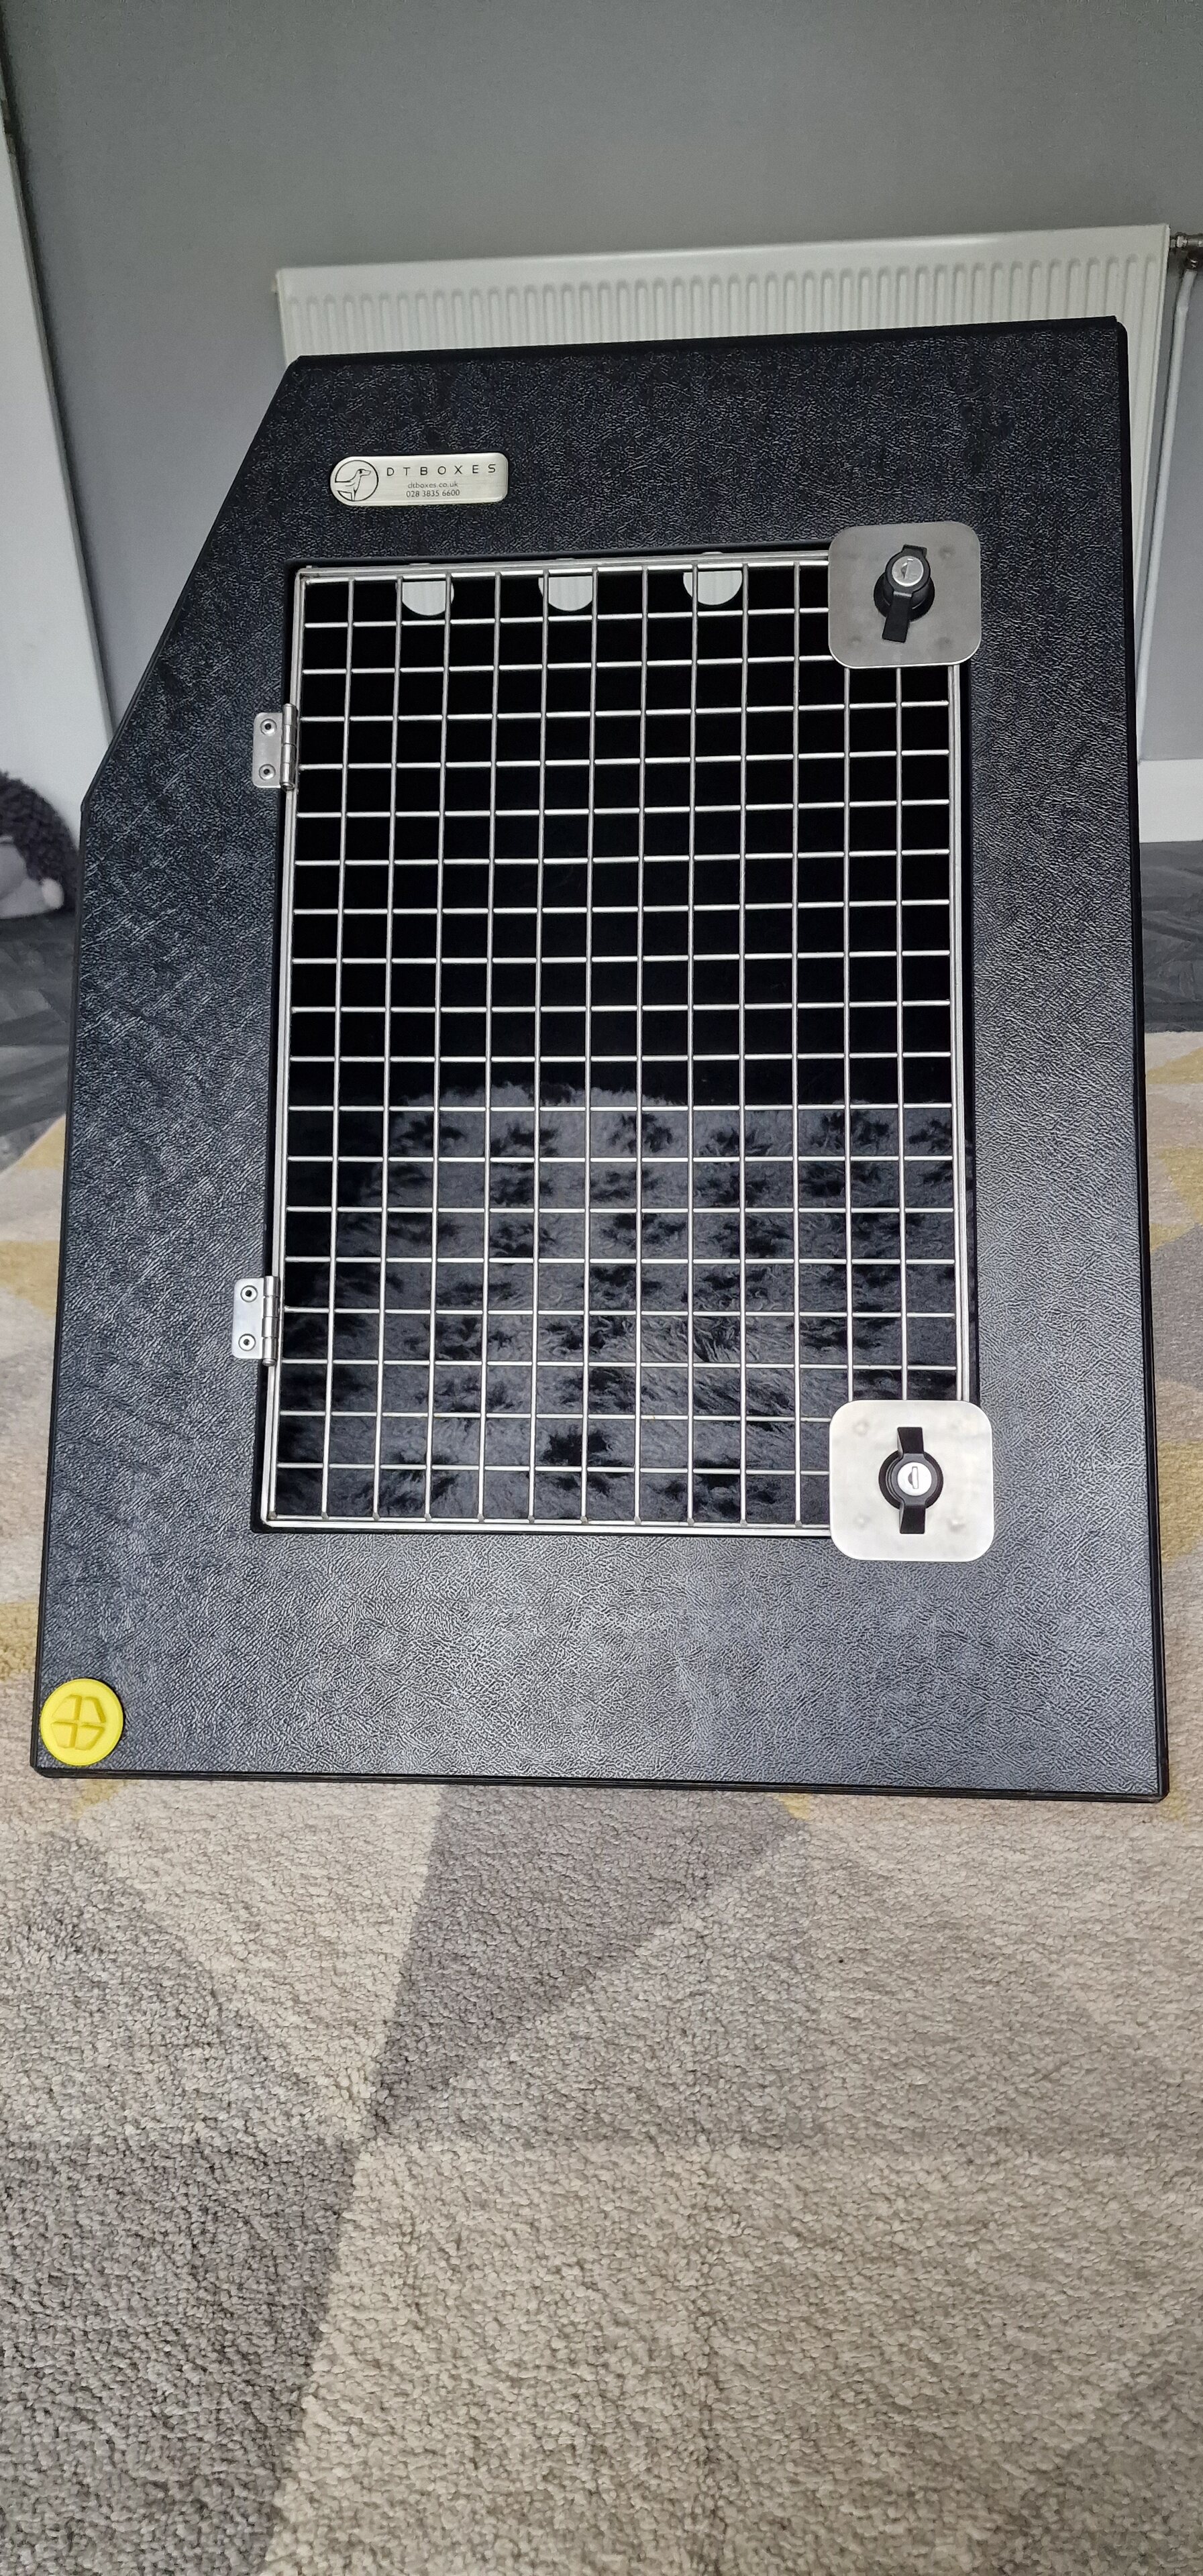 Pistonheads - The image shows an open cat carrier with a small black kitten inside. The carrier is placed on what appears to be a carpeted floor, and the room has neutral-colored walls and a white door in the background. There's a white paper or sign taped onto the front of the cat carrier, but it's not clear what the contents are from this angle.